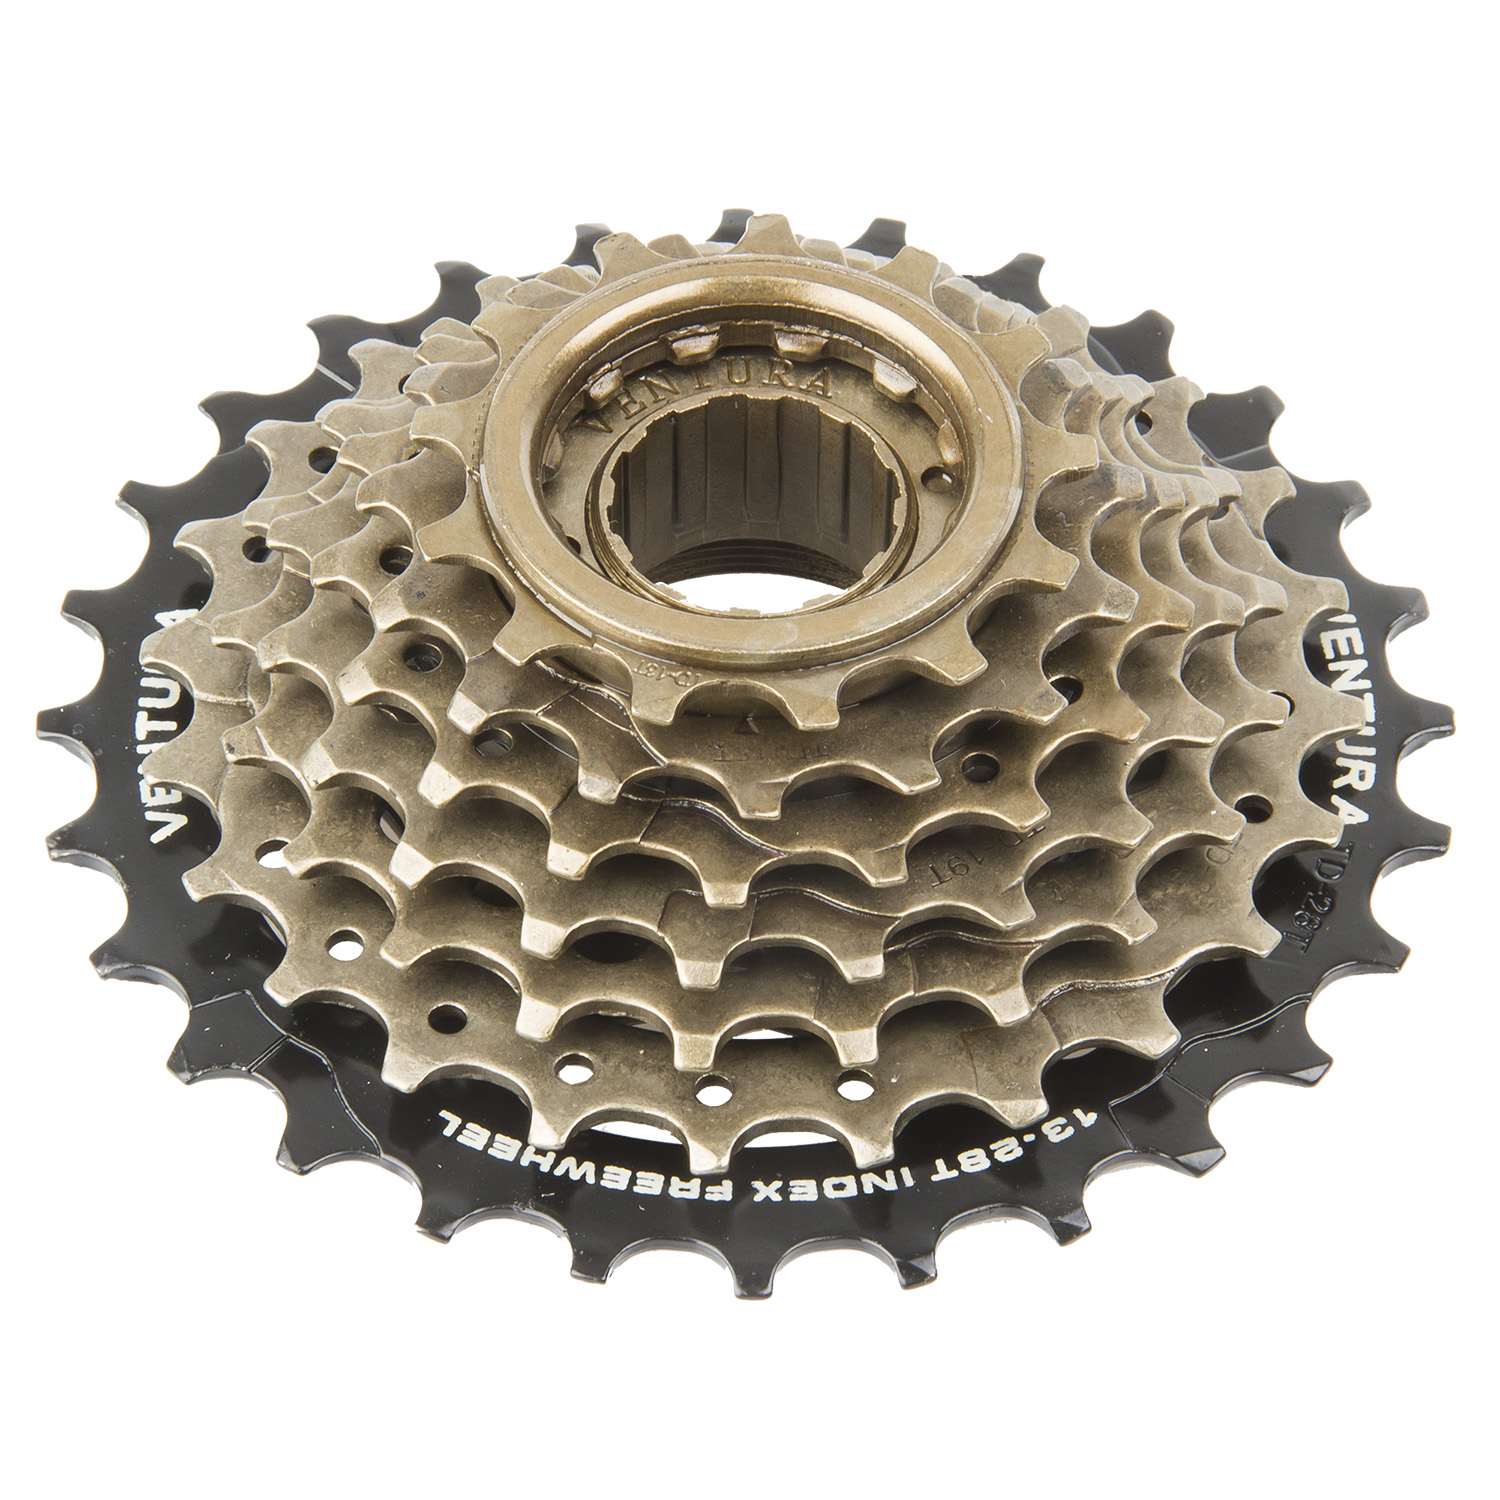 700176 VENTURA 7 speed sprocket with screw attachment – AVAILABLE IN SELECTED BIKE SHOP